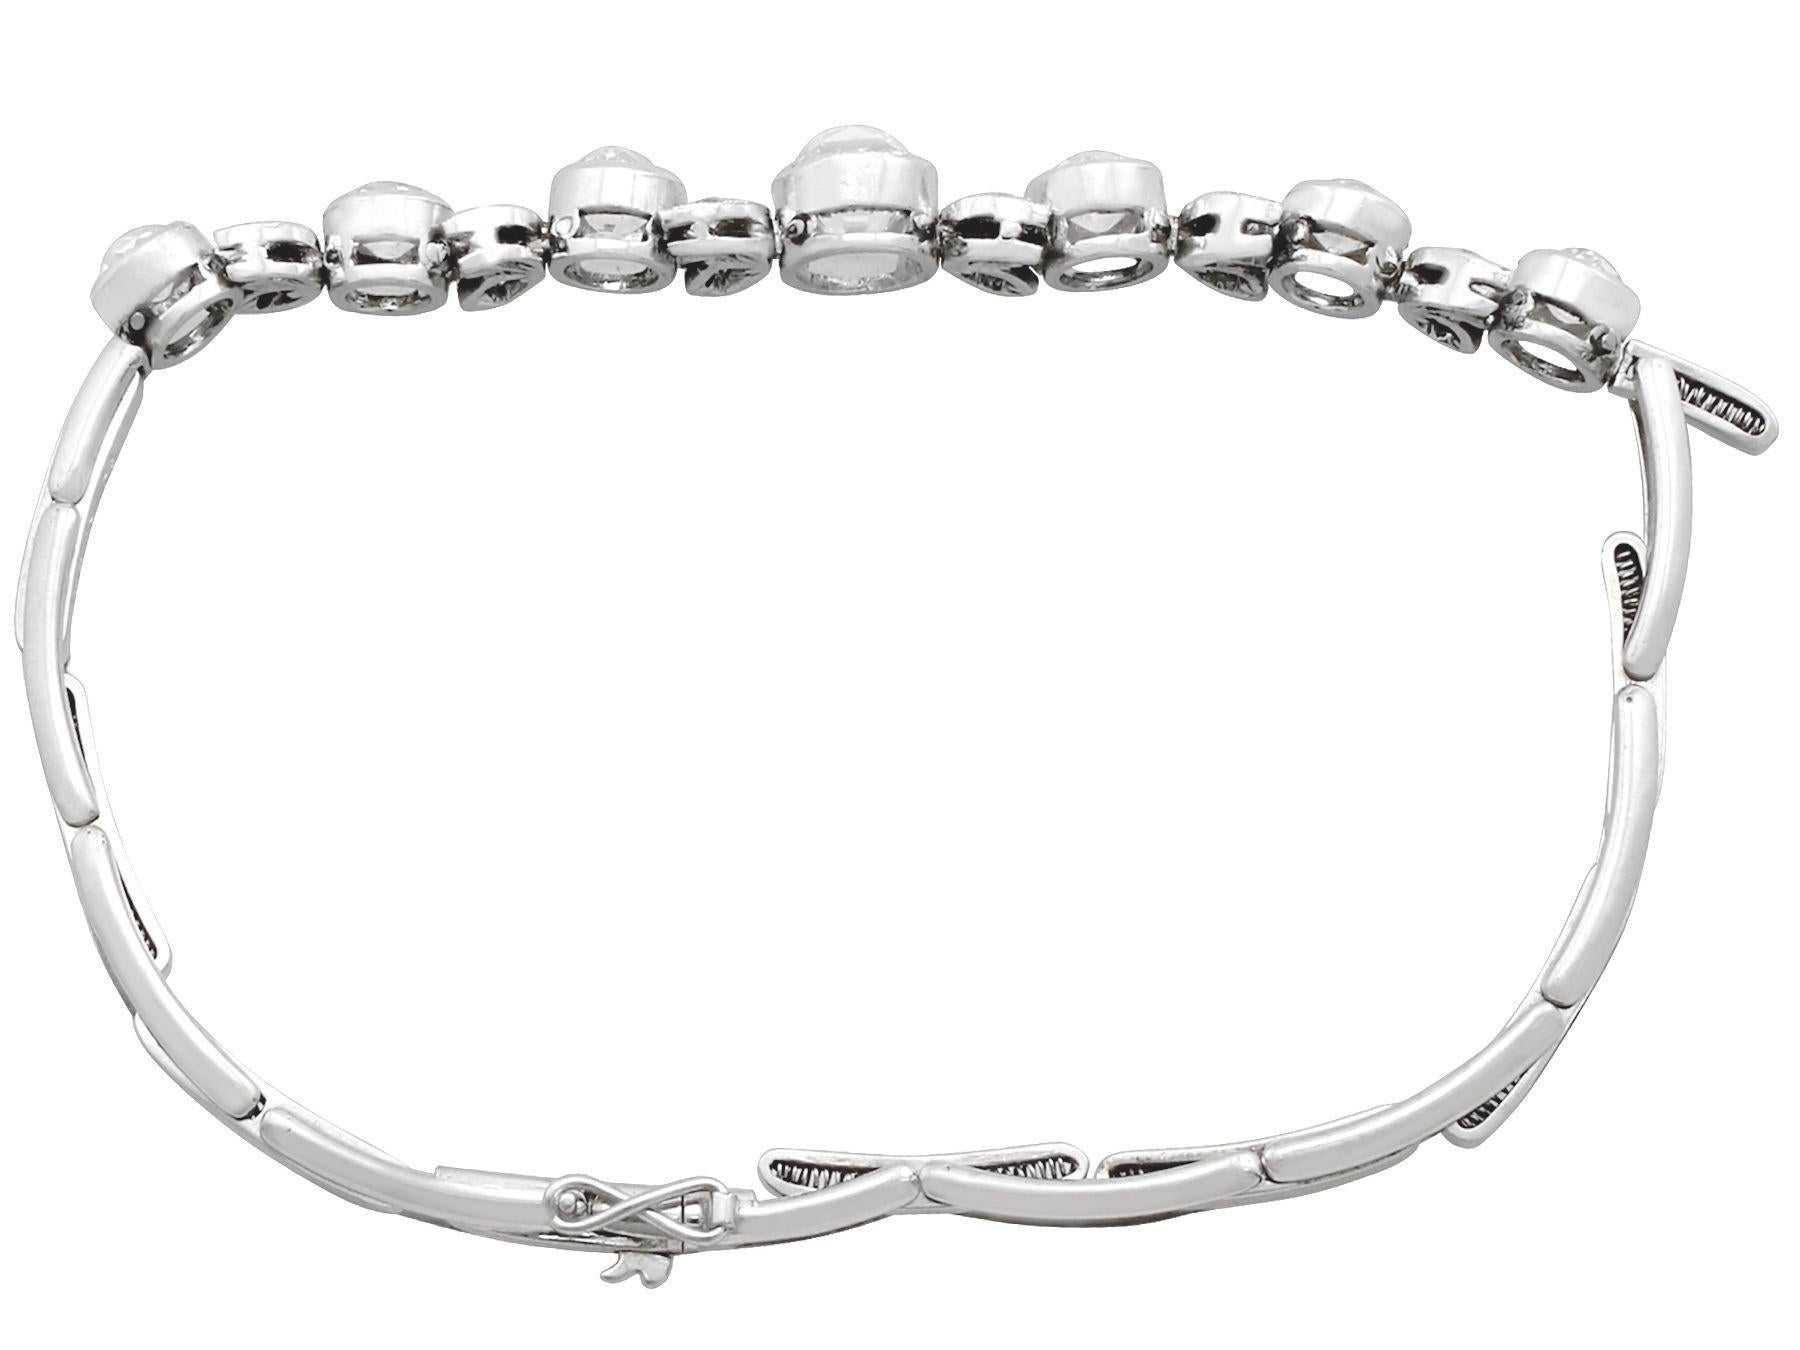 A stunning antique 3.20 carat diamond and 18 karat white gold, platinum set expandable bracelet; part of our diverse antique jewelry and estate jewelry collections.

This stunning, fine and impressive 1930s diamond bracelet has been crafted in 18k